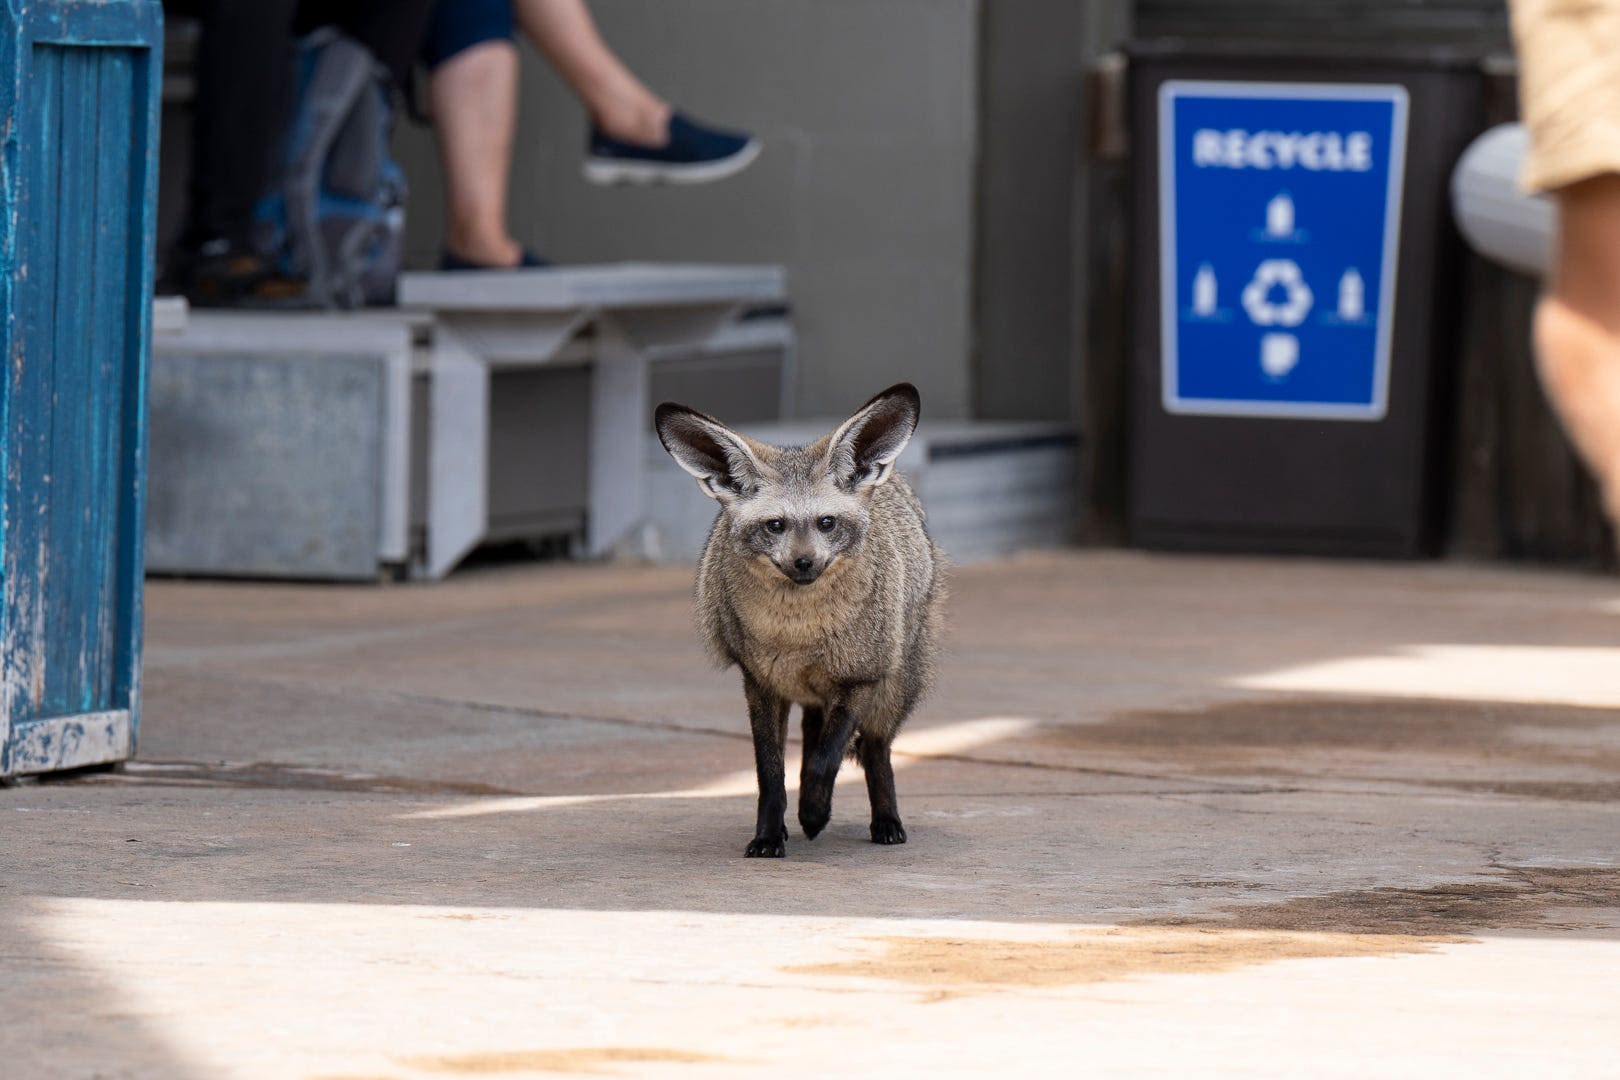 Columbus Zoo announces death of bat-eared fox known for his 'playful spirit'